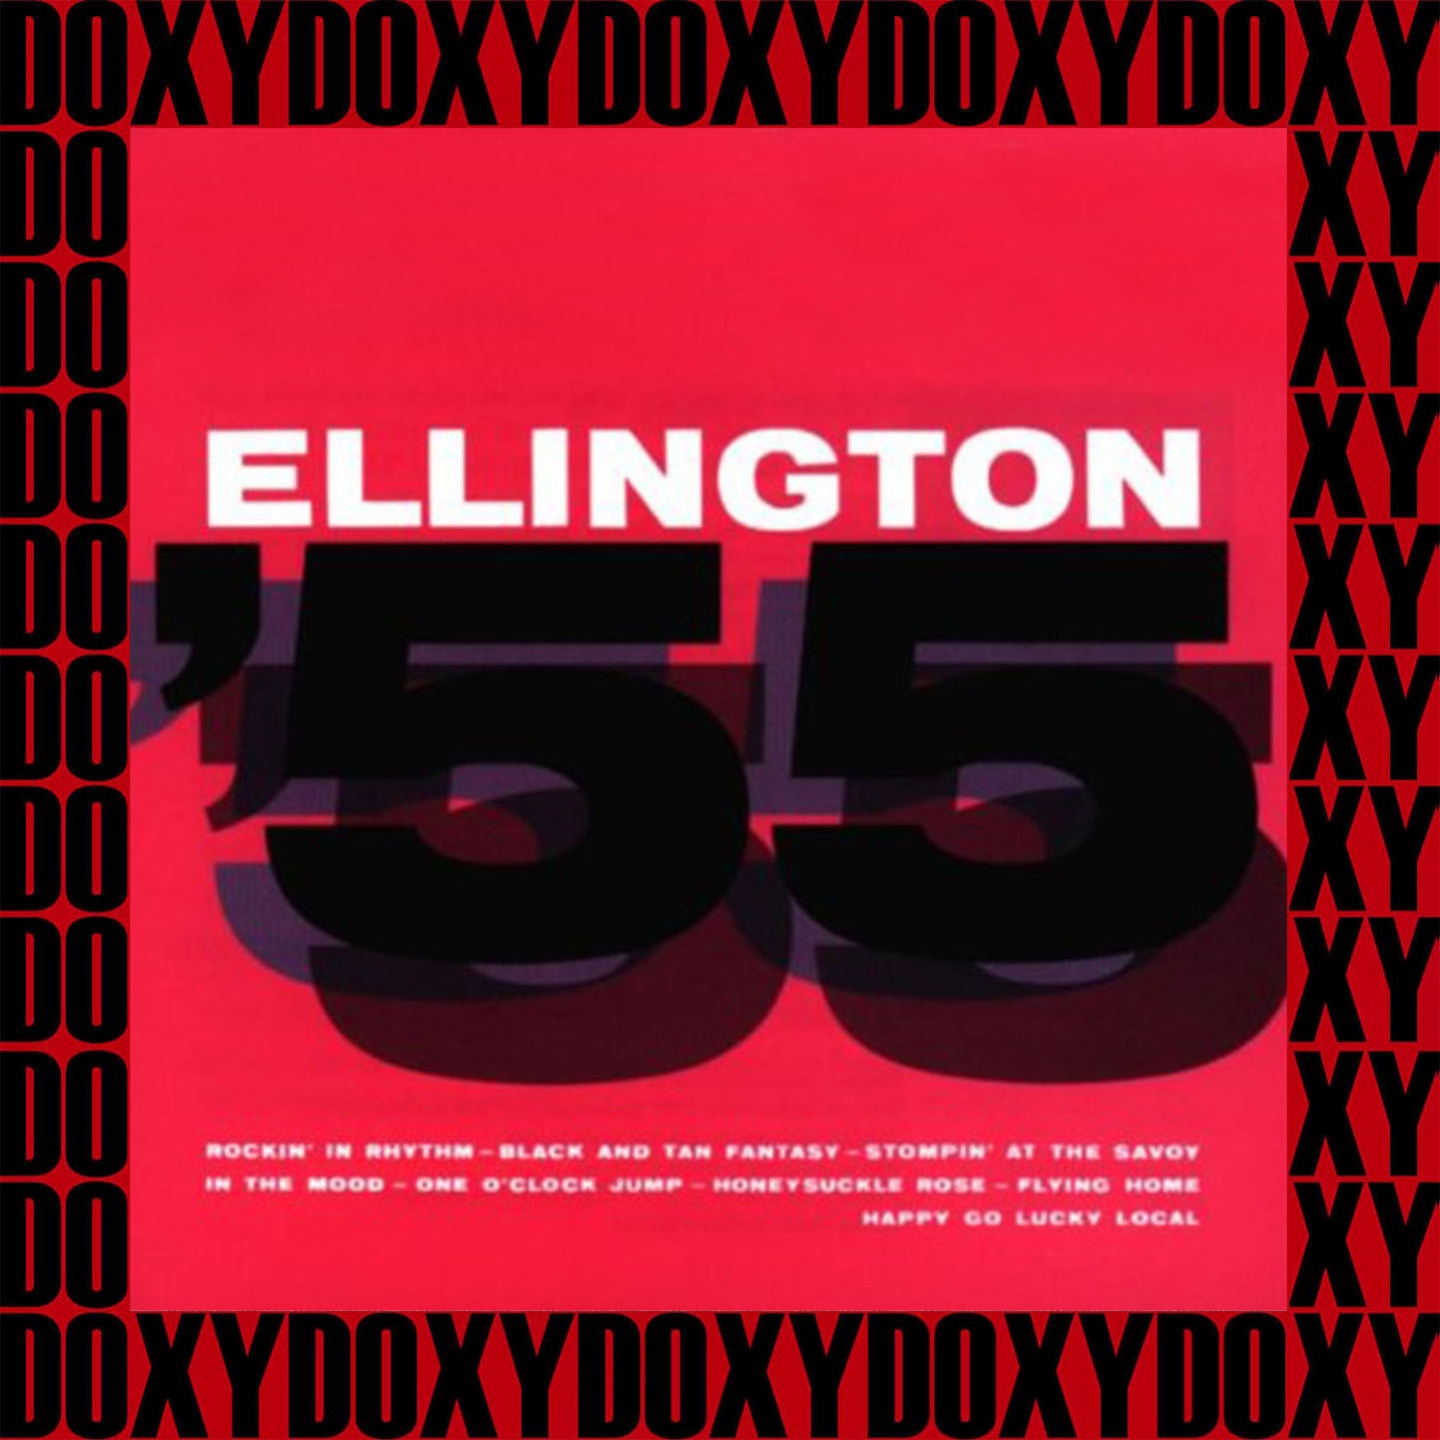 Ellington '55 (Expanded, Remastered Version) (Doxy Collection)